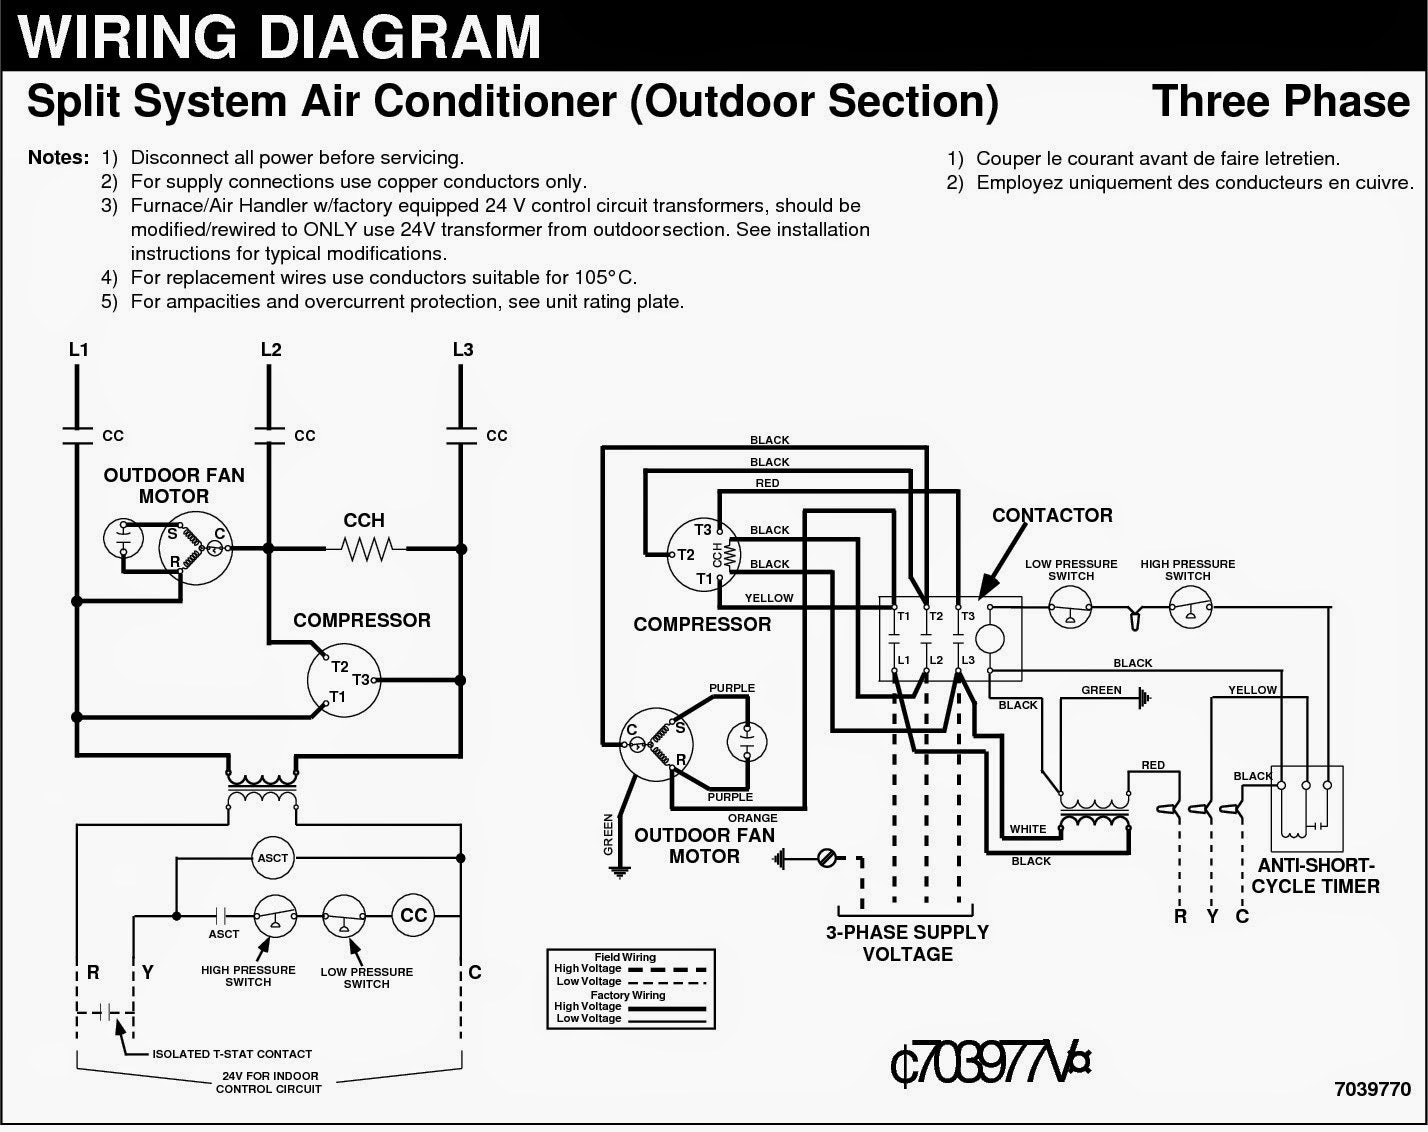 Split system air conditioner wiring diagram fig 13 cooling units three phase electrical newest portrayal like